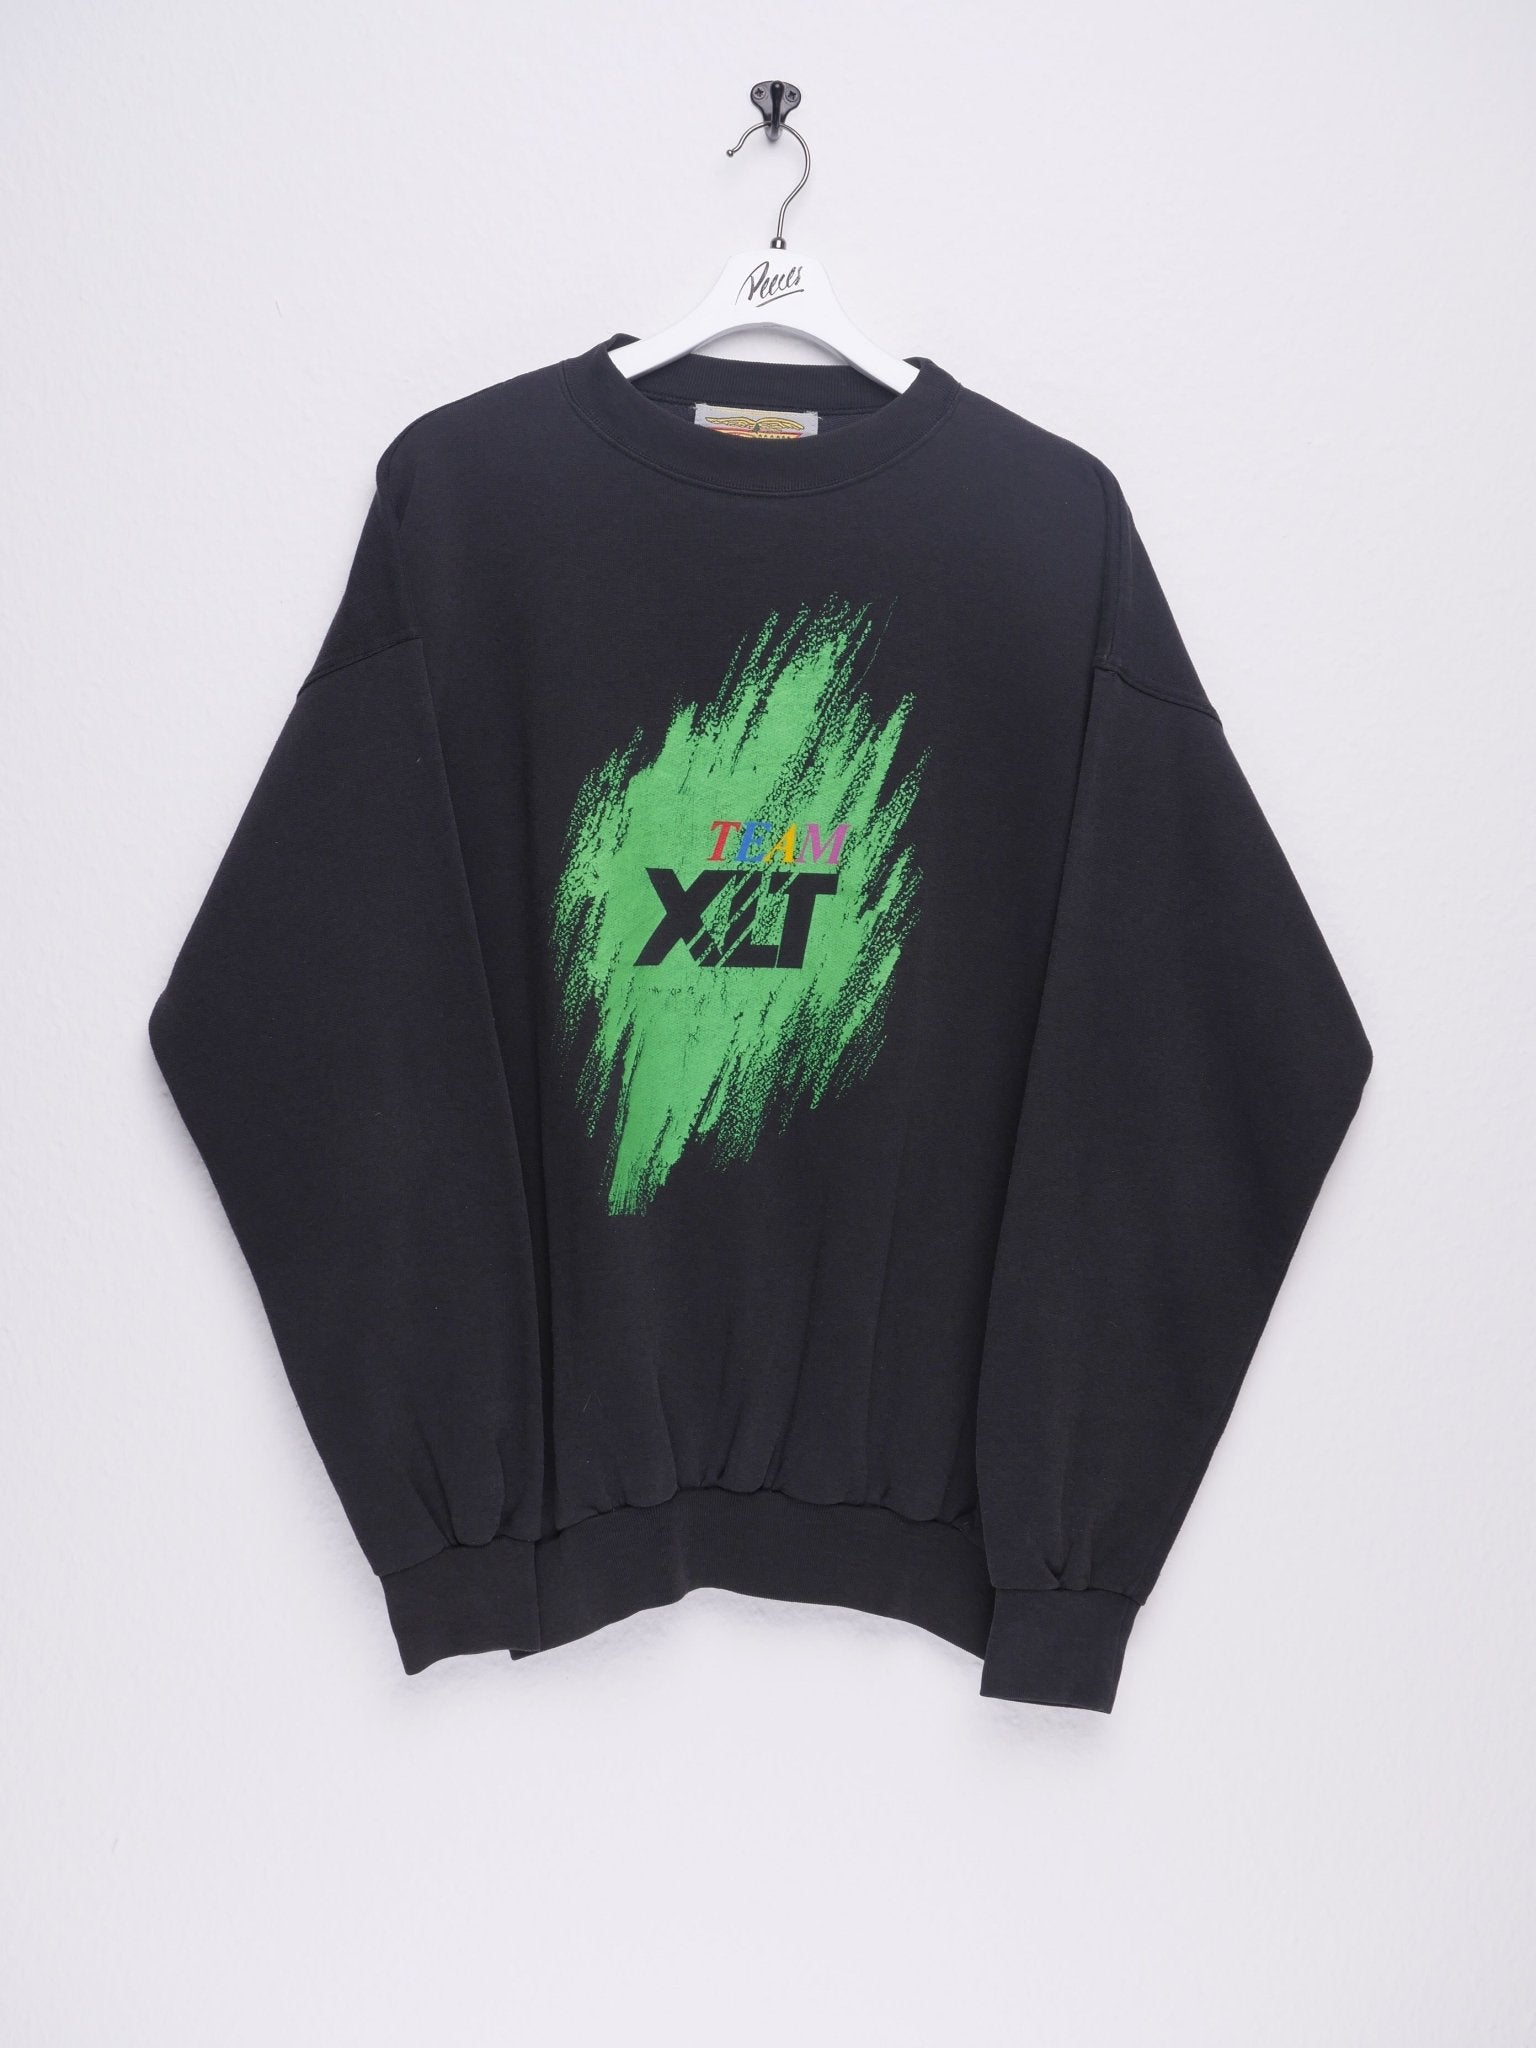 Team XLT printed Logo washed Vintage Sweater - Peeces